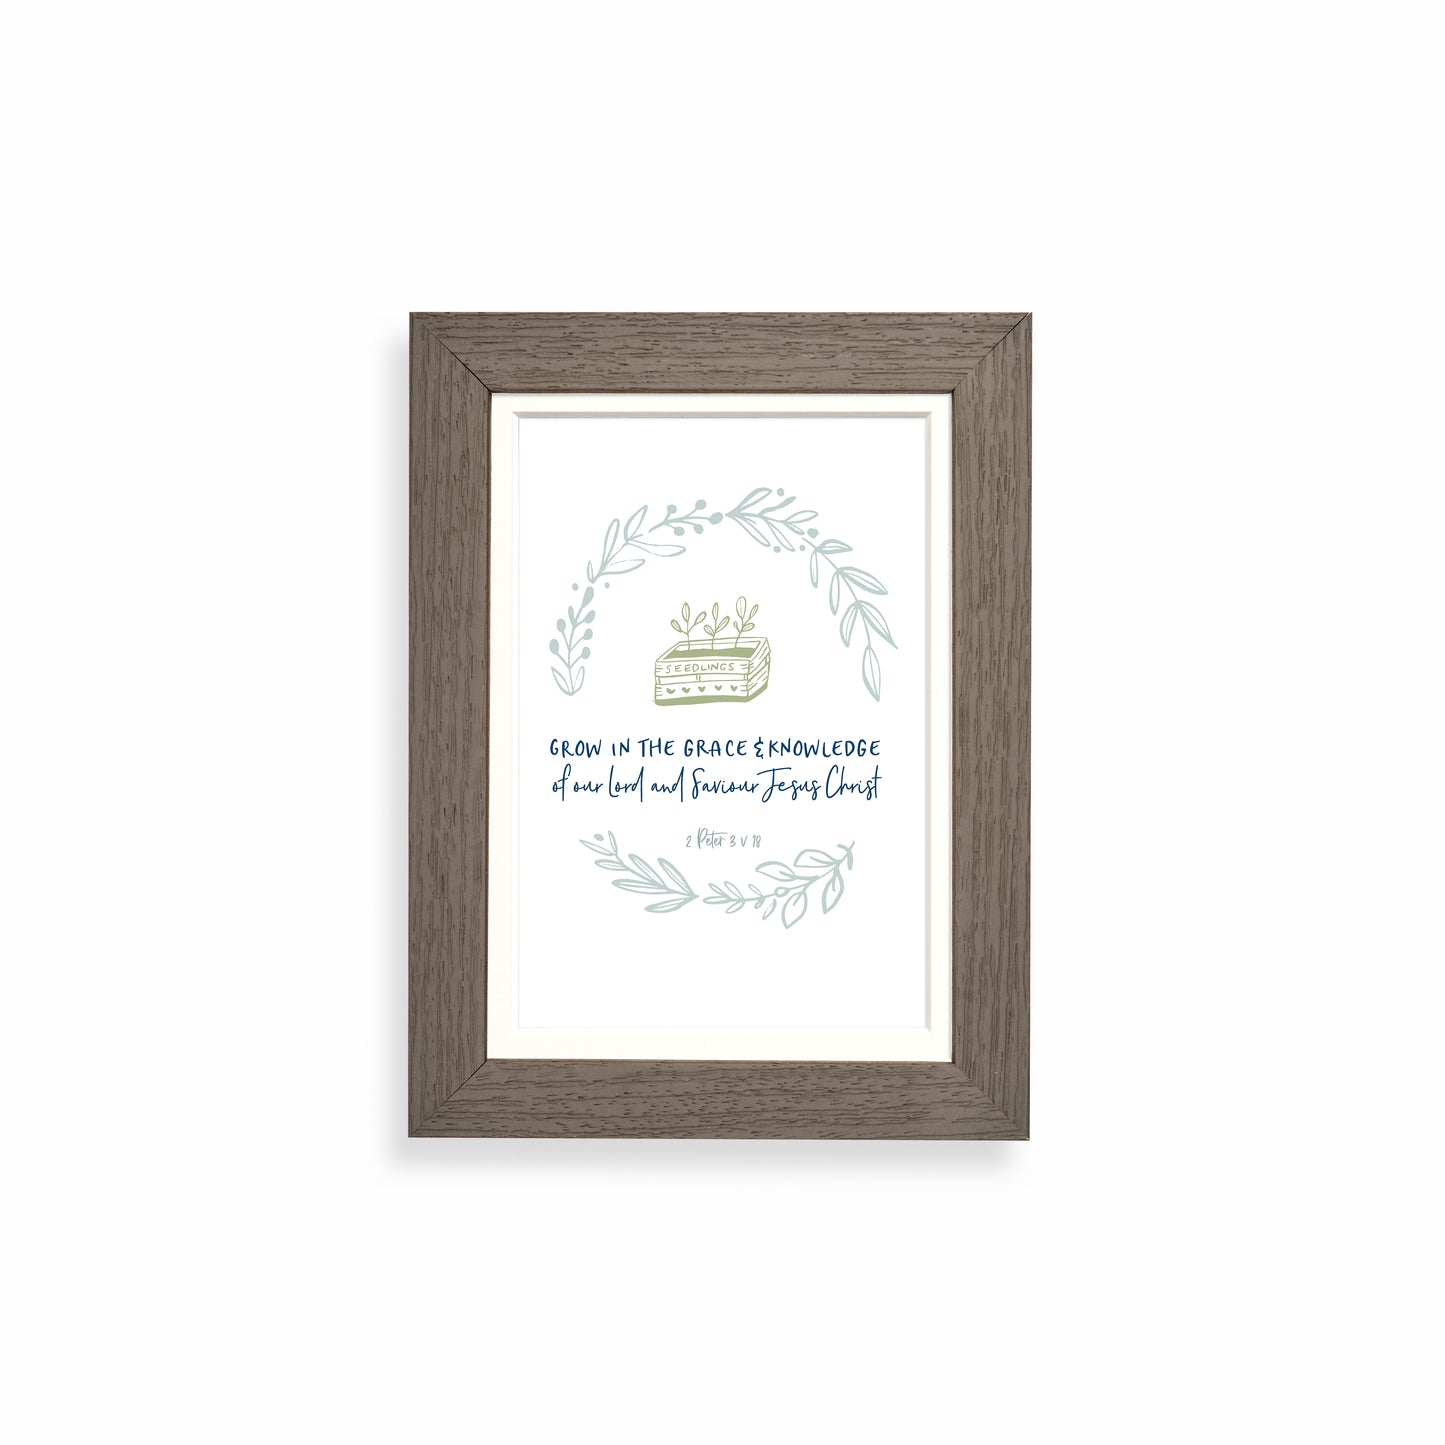 Grow in the grace & knowledge of our Lord framed print